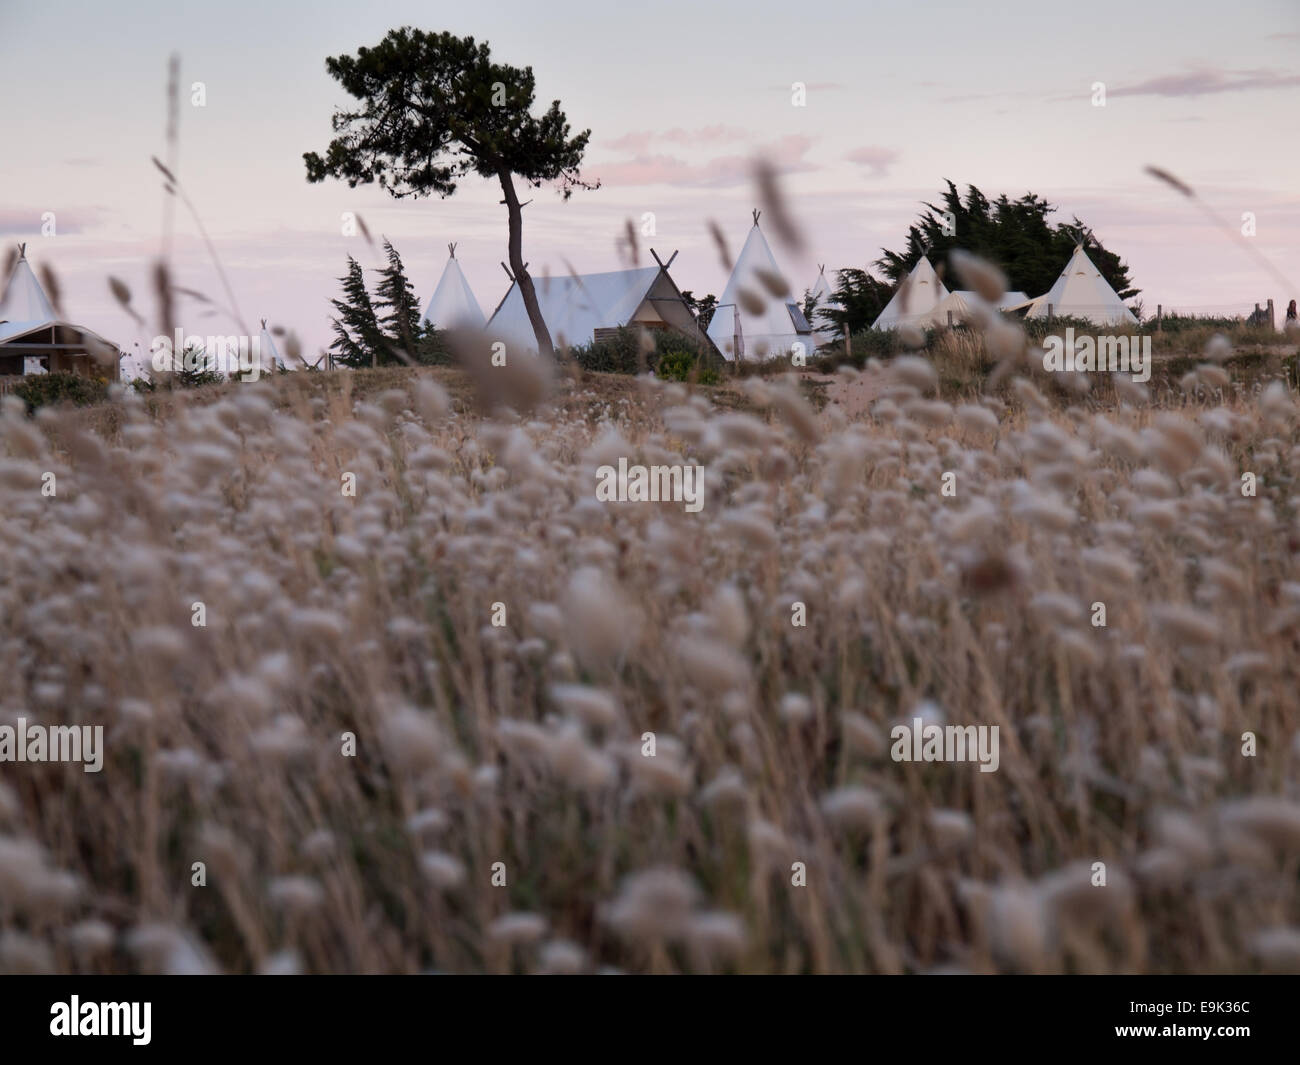 luxury campsite in coastal dunes amongst scattered pines viewed over a field of rabbit tail grass in soft evening light Stock Photo